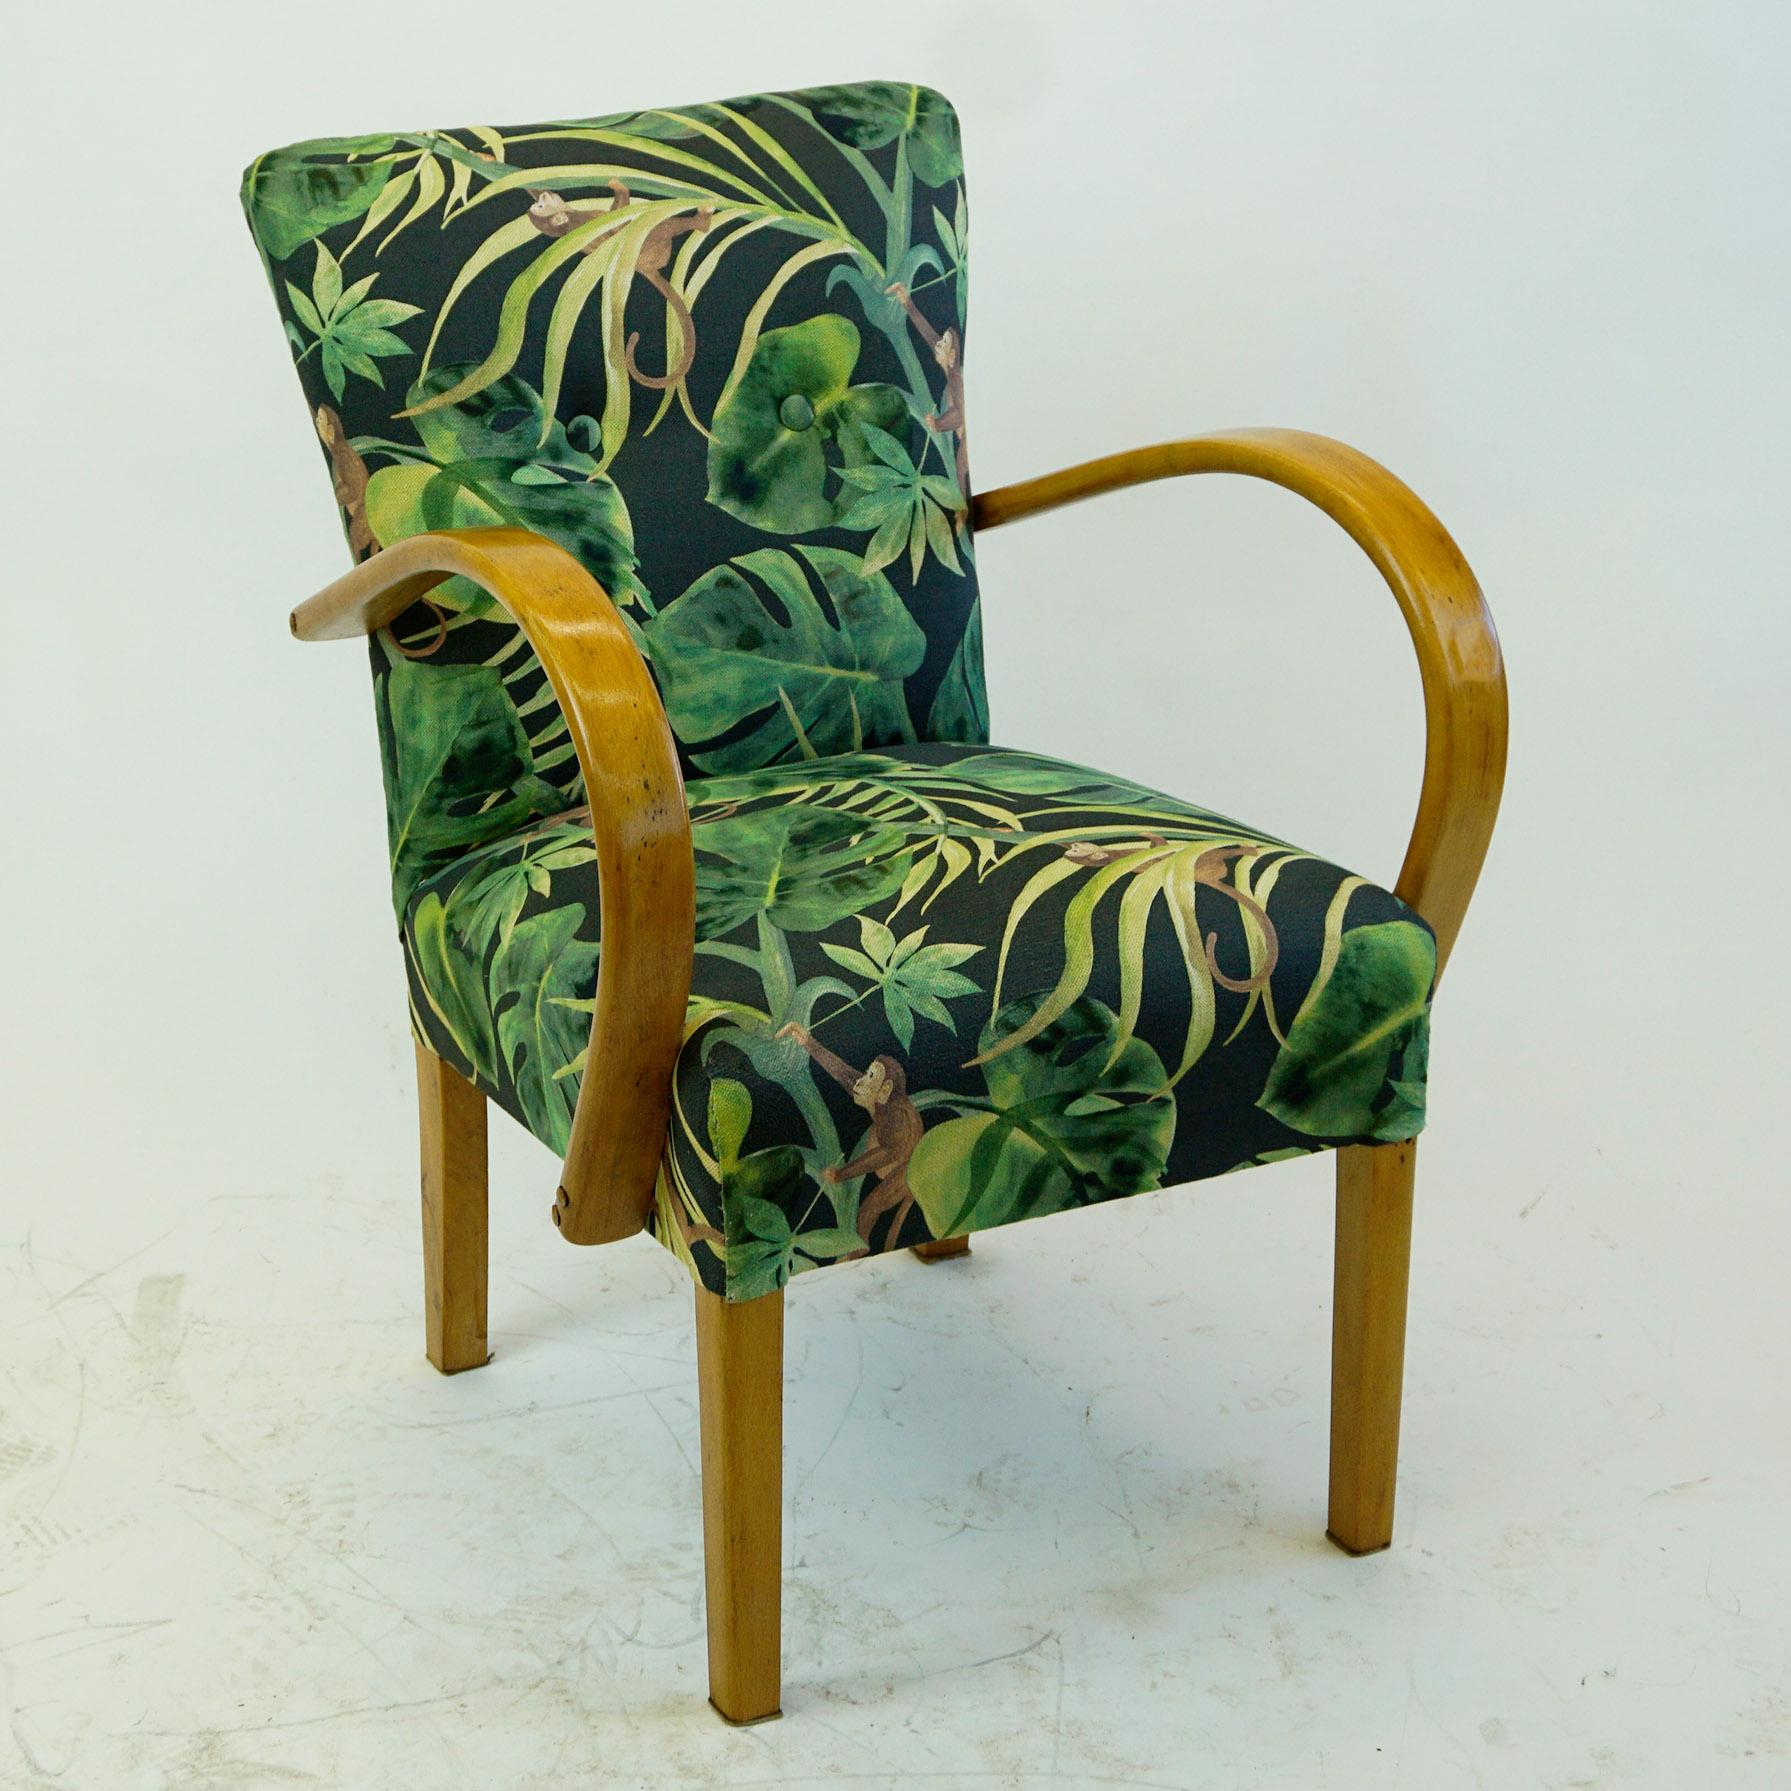 This charming Art Deco armchair has been completely restored and newly upholstered. The structure in beechwood features striking armrests that were curved using steam. The new upholstery is in black and green fabric with floral motifs and apes.